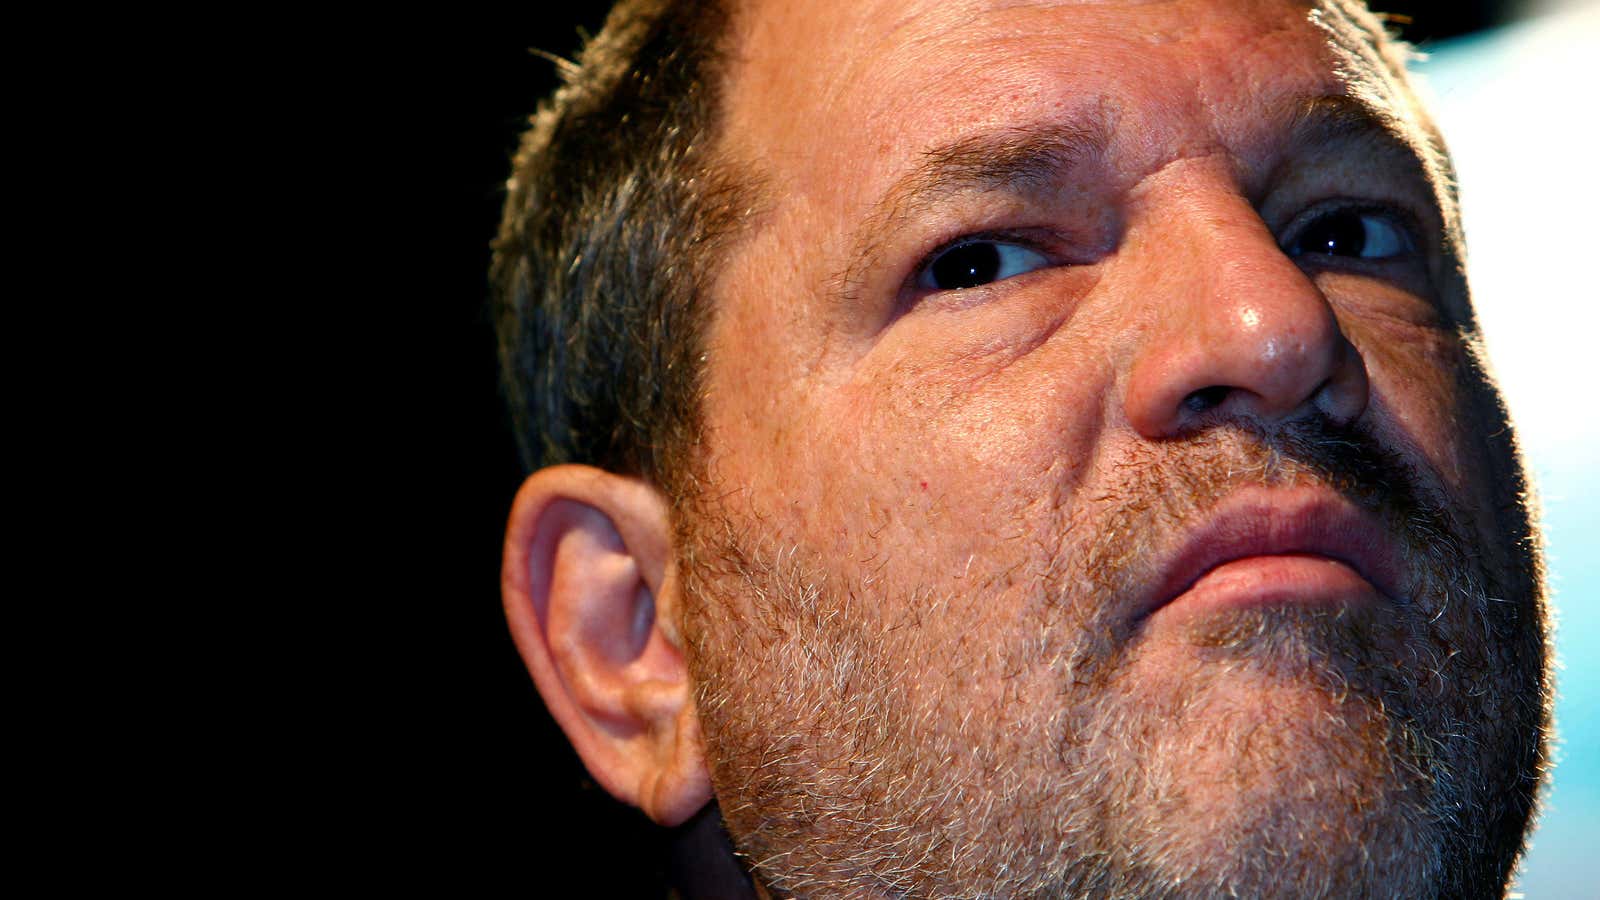 After a year of concerted effort, Weinstein’s campaign to track and silence his accusers crumbled.